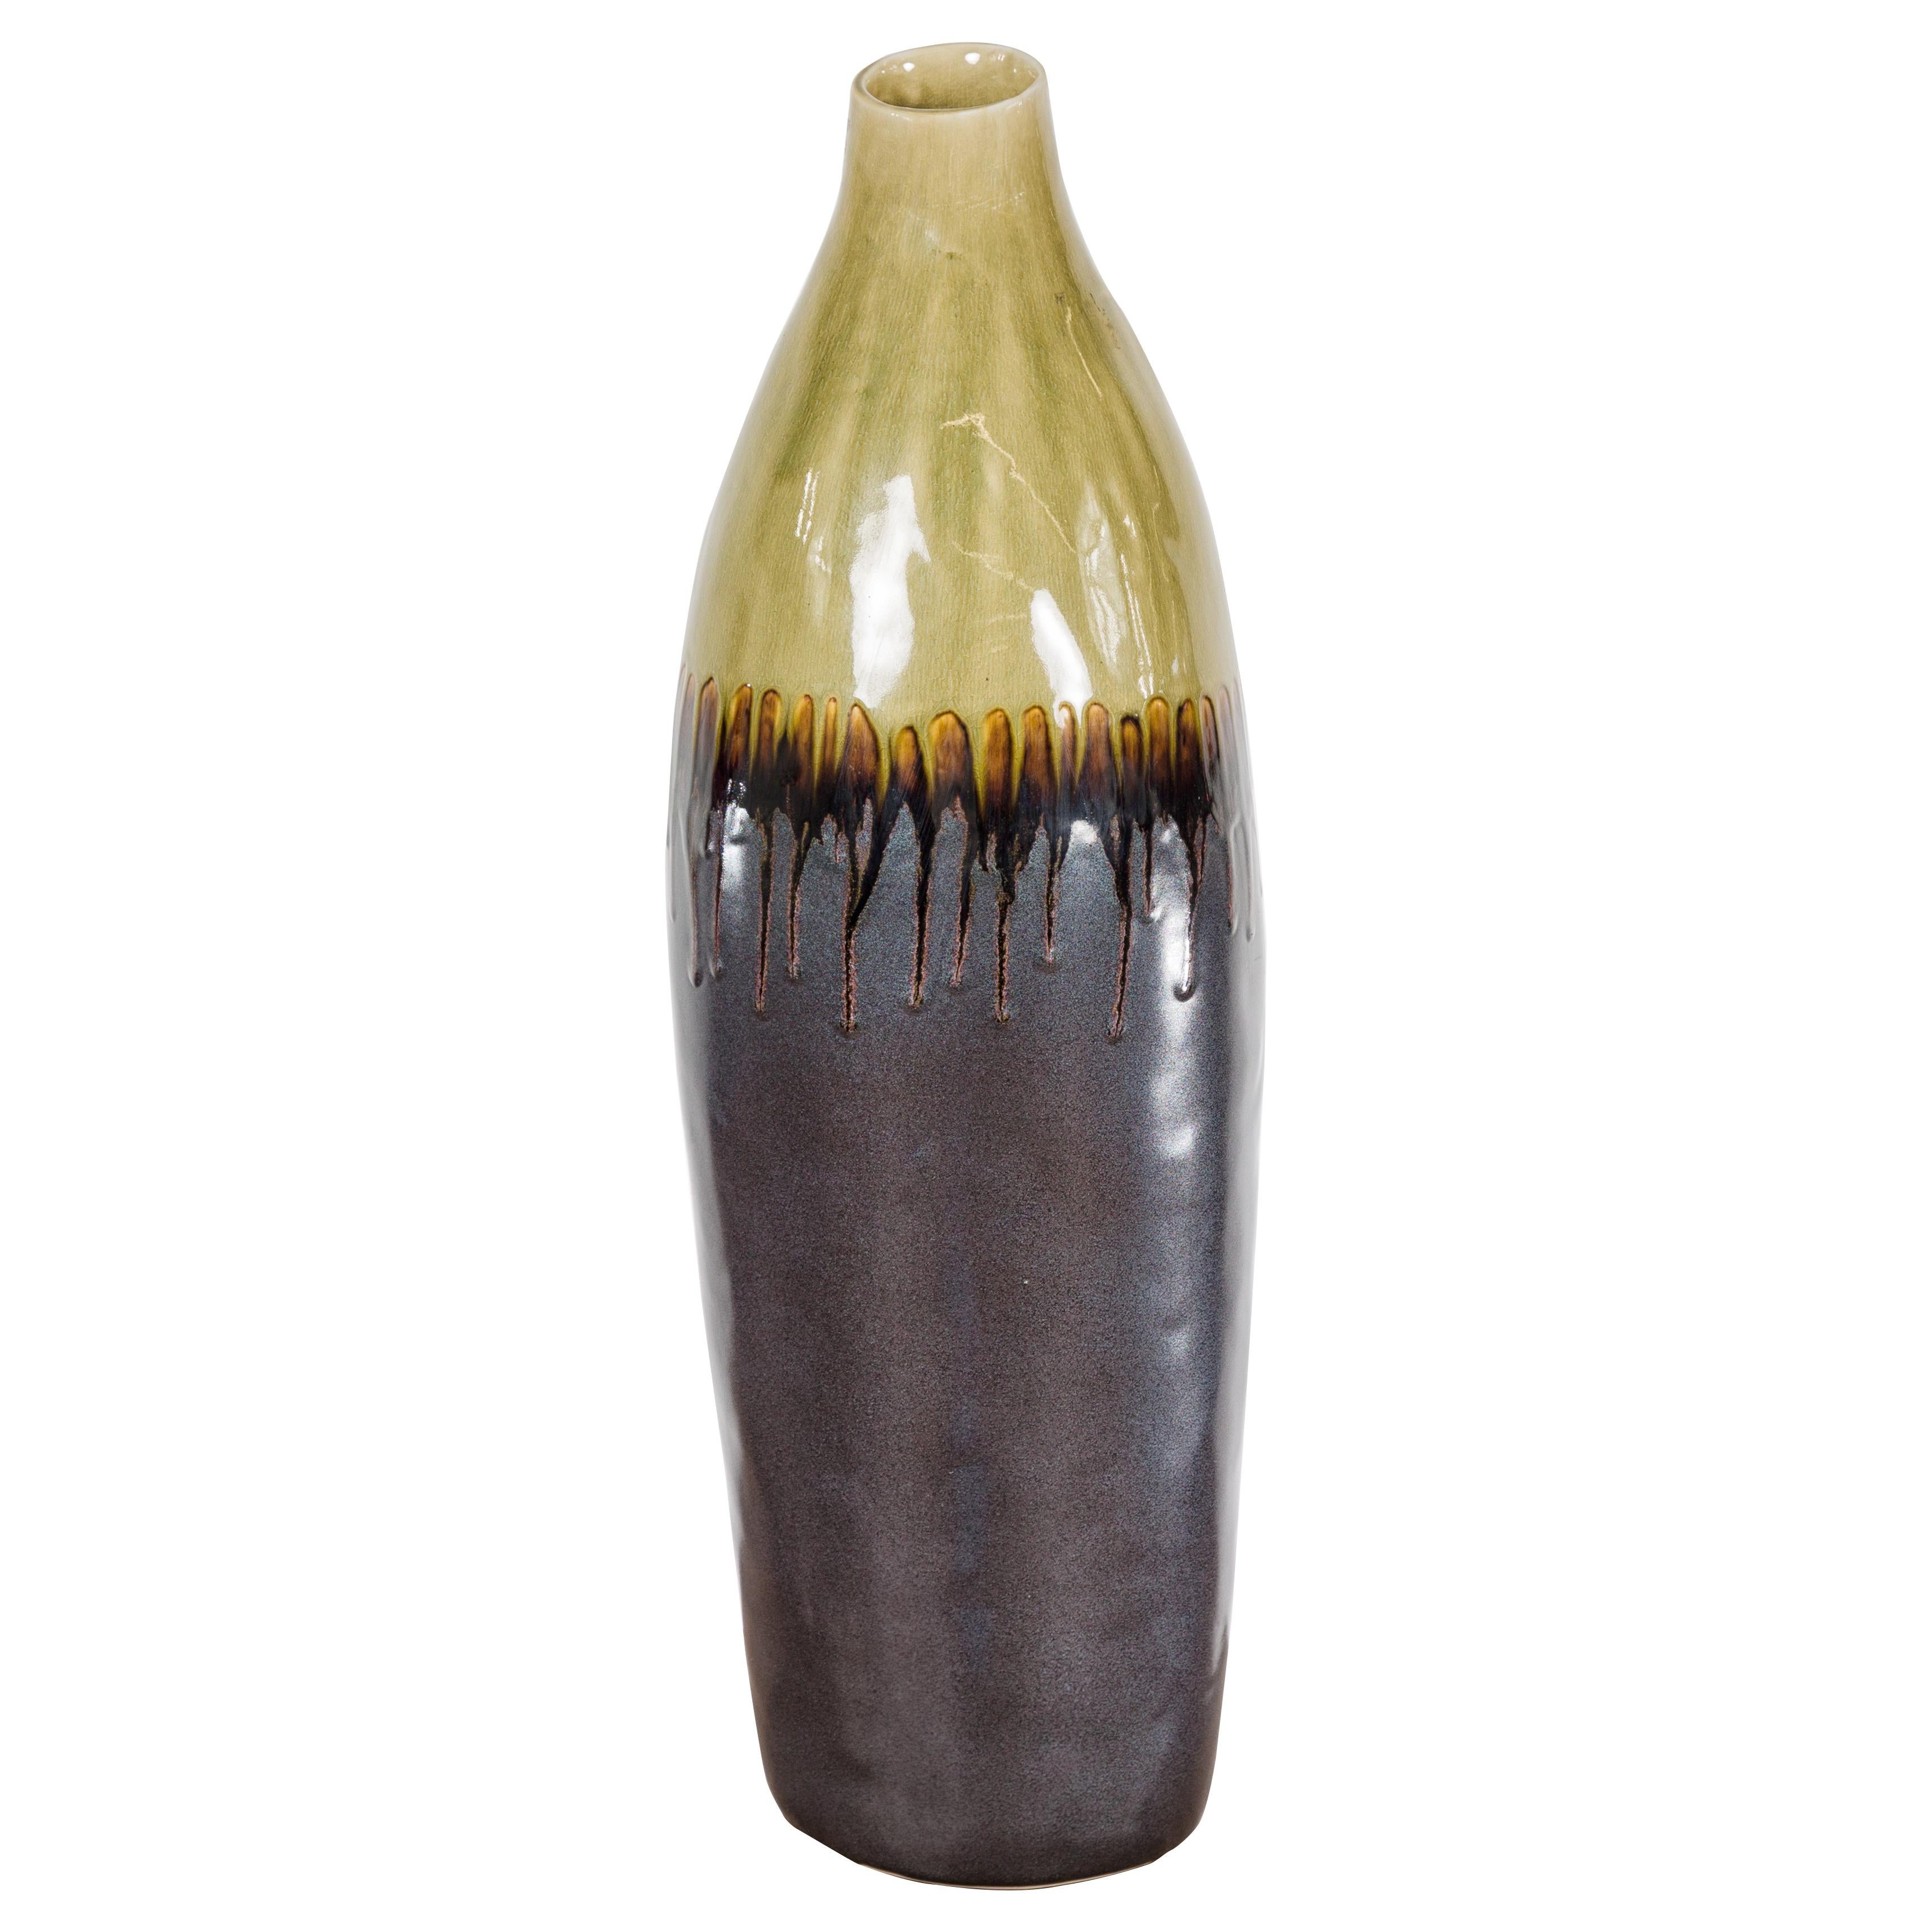 Handmade Artisan Ceramic Vase with Olive Green, Dark Grey and Brown Dripping For Sale 10